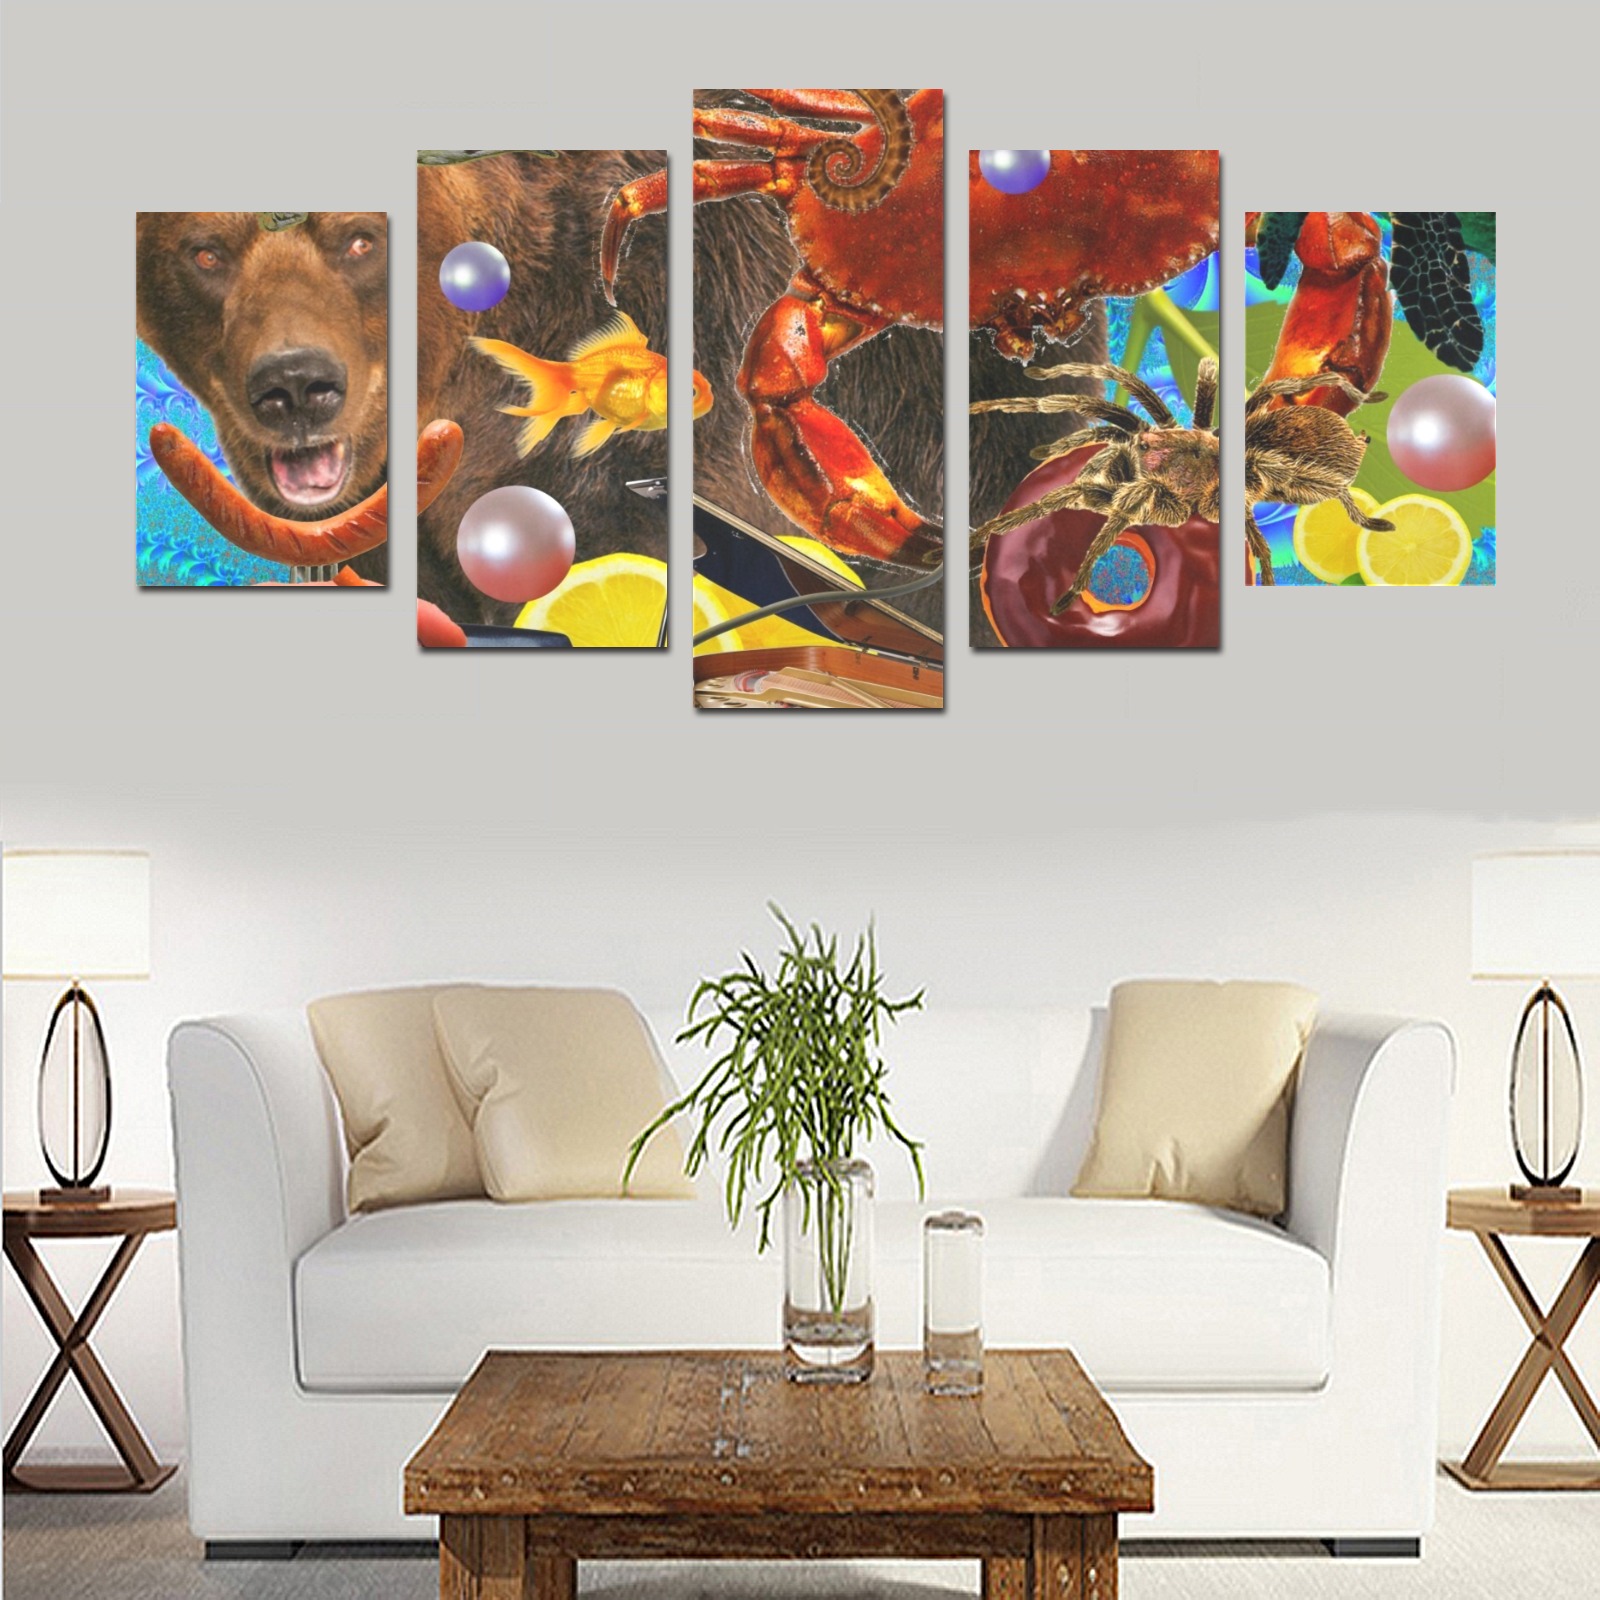 THROUGH SPACE AND TIME 2 Canvas Print Sets D (No Frame)